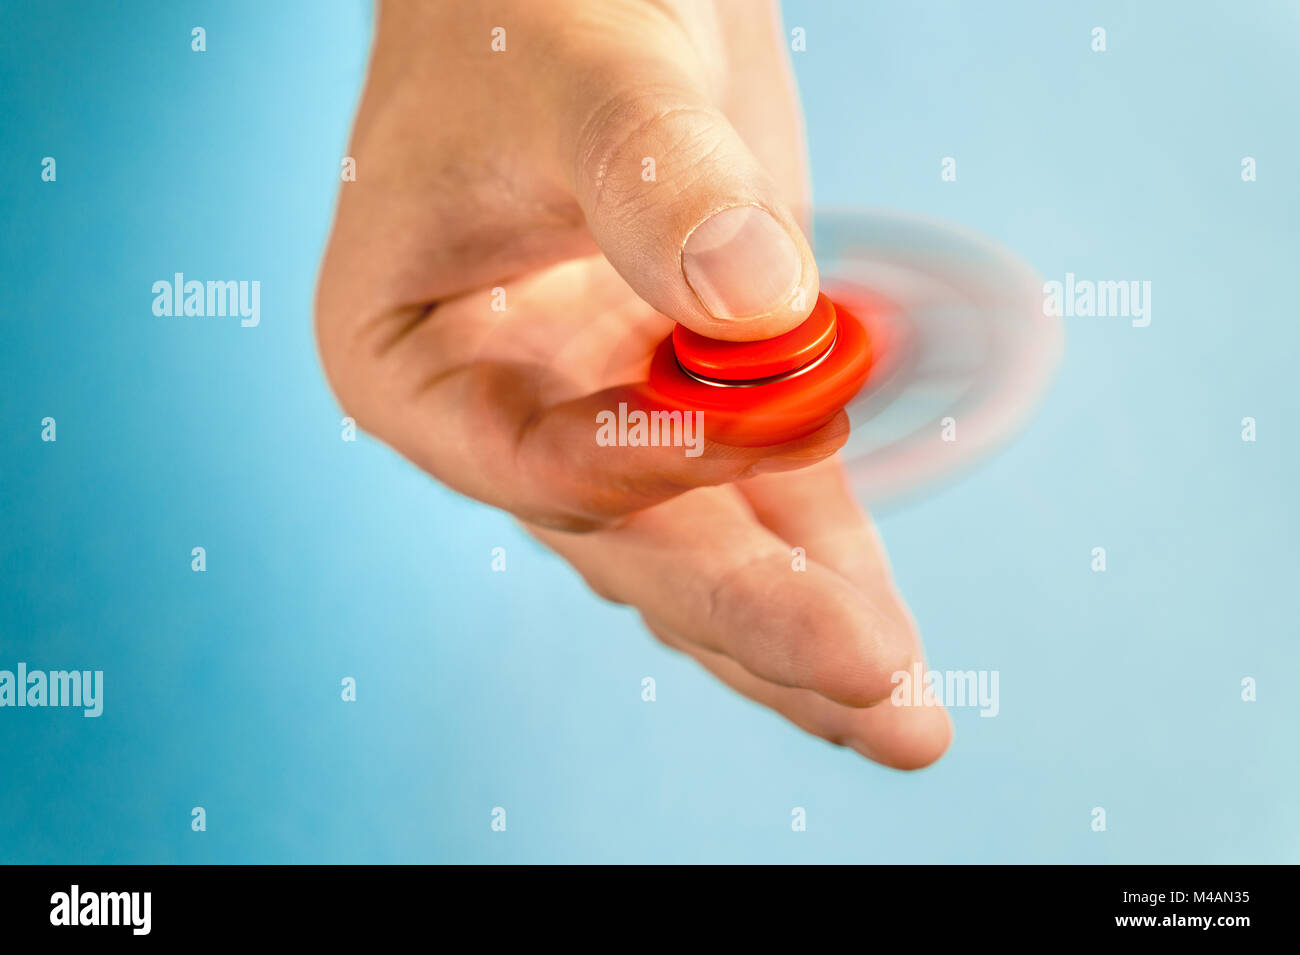 Fidget spinner spinning in hand with blue background. Towards camera. Stock Photo